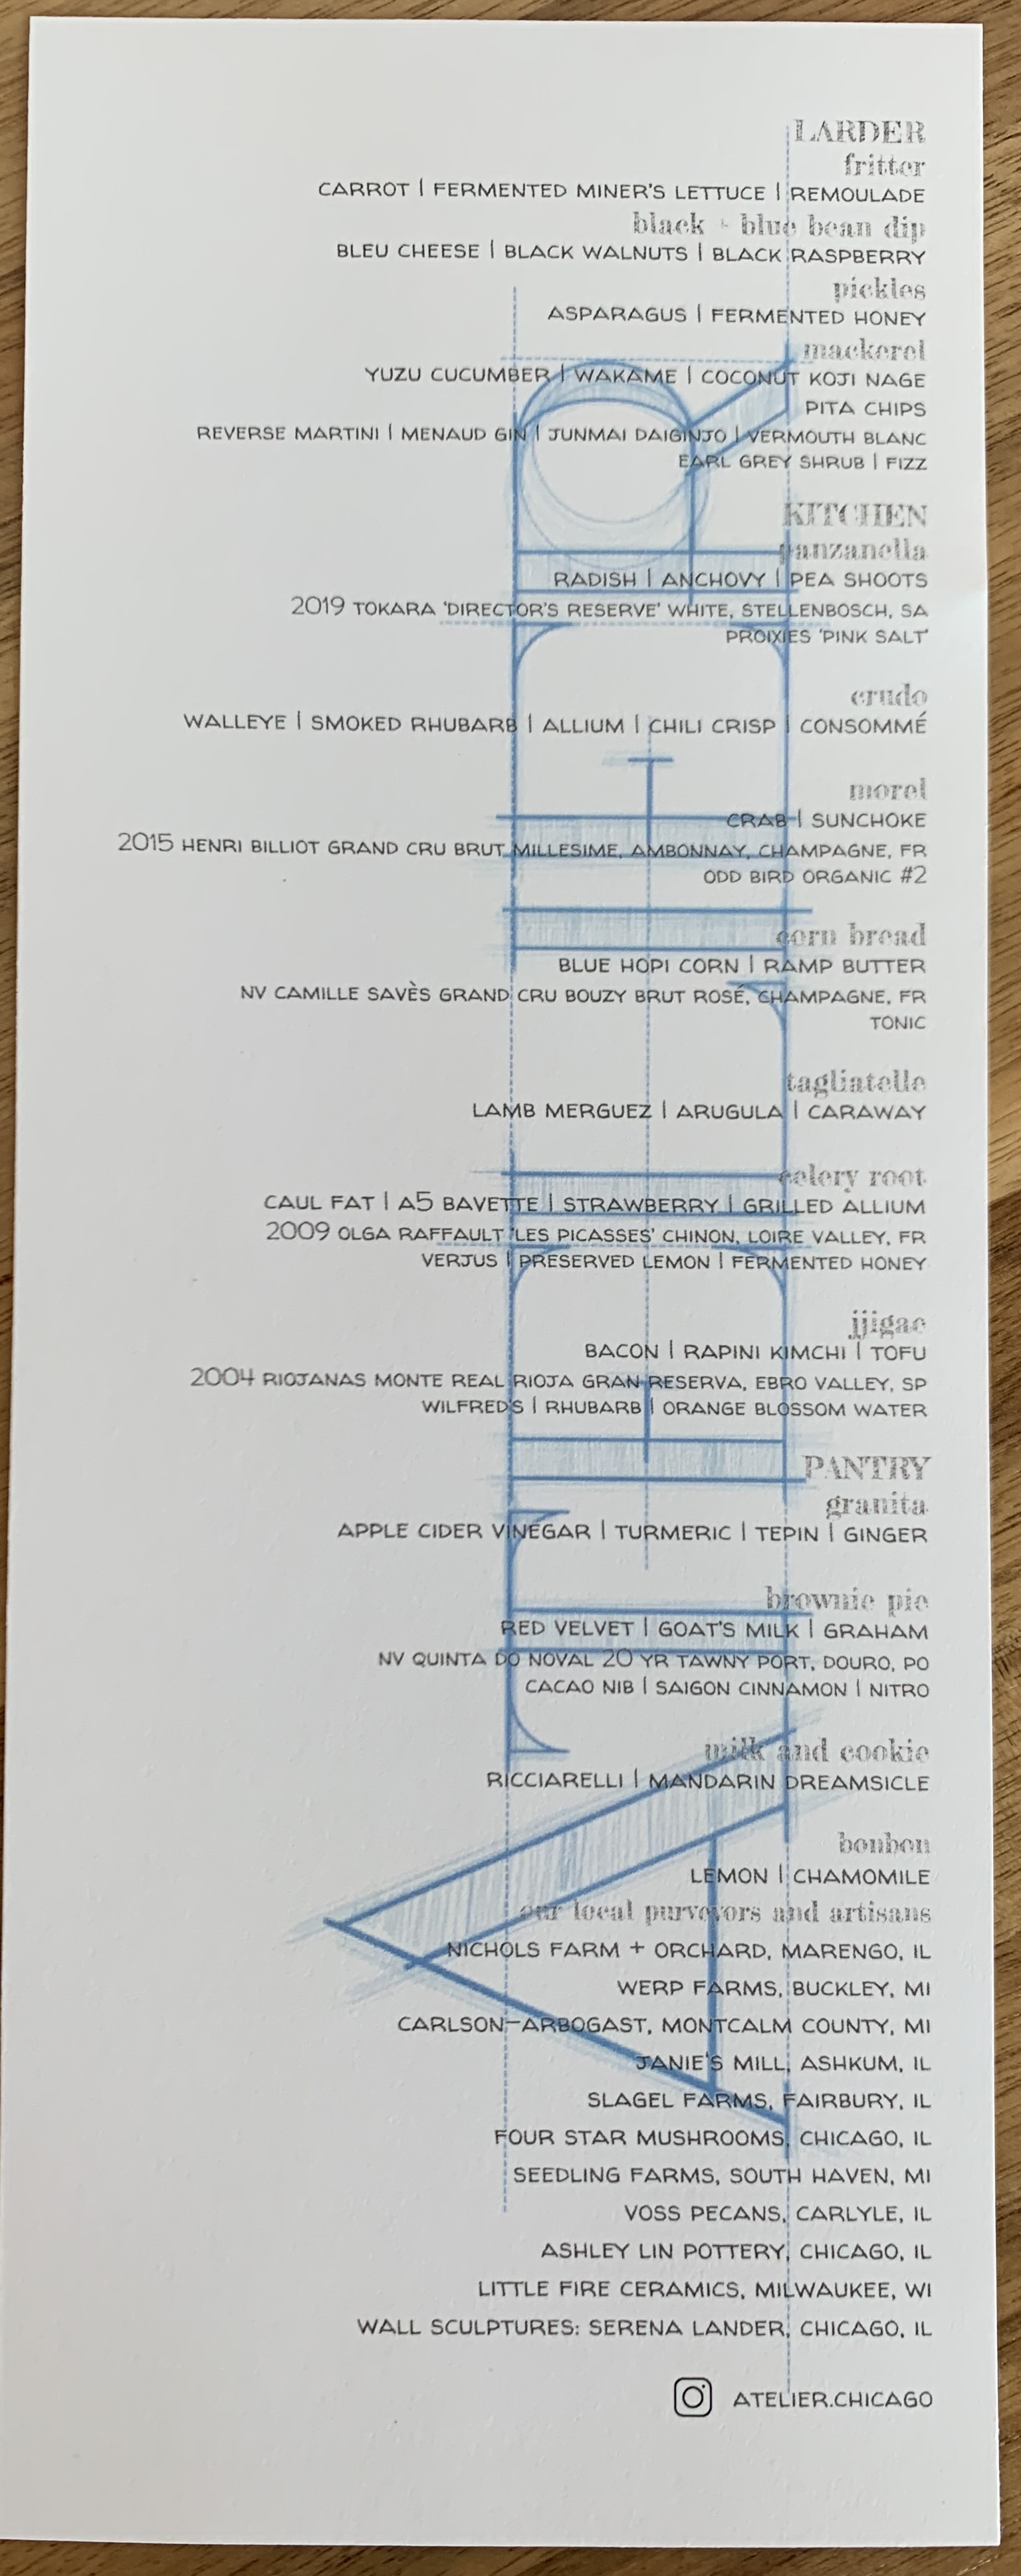 Atelier menu, listing each course along with beverage pairings.

Larder: fritter, black & blue bean dip, pickles, mackerel. Served with a reverse martini, or an earl grey fizz.

Panzanella, served with the 2019 Tokara white, or proxies pink salt.

Crudo, with no beverage pairing.

Morels, served with a 2015 Henri Billiot grand cru brut champagne, or odd bird organic #2.

Corn bread, served with a grand cru bouzy brut rose, or tonic water.

Tagliatelle, with no beverage pairing.

Celery root, served with a 2009 Olga Raffault Chinon, or a verjus featuring preserved lemon & fermented honey.

Jjigae, served with a 2004 Roijanas Monte Real Rooja Gran Reserva, or a rhubarb-flavoured aperol spritz.

Grania, with no beverage pairing.

Brownie pie, with a tawny port or a cocao nob & cinnamon nitro'd drink.

Milk & cookie, with no pairing.

Bonbon, with no pairing.

The menu credits several local farms and artisans: Nichols Farm, Werp Farms, Carlson-Arbogast, Janie's Mill, Slagel Farms, Four Star Mushrooms, Seedling Farms, Voss Pecans, Ashley Lin Pottery, Little Fire Ceramnics, and wall sculptures by Serena Lander.